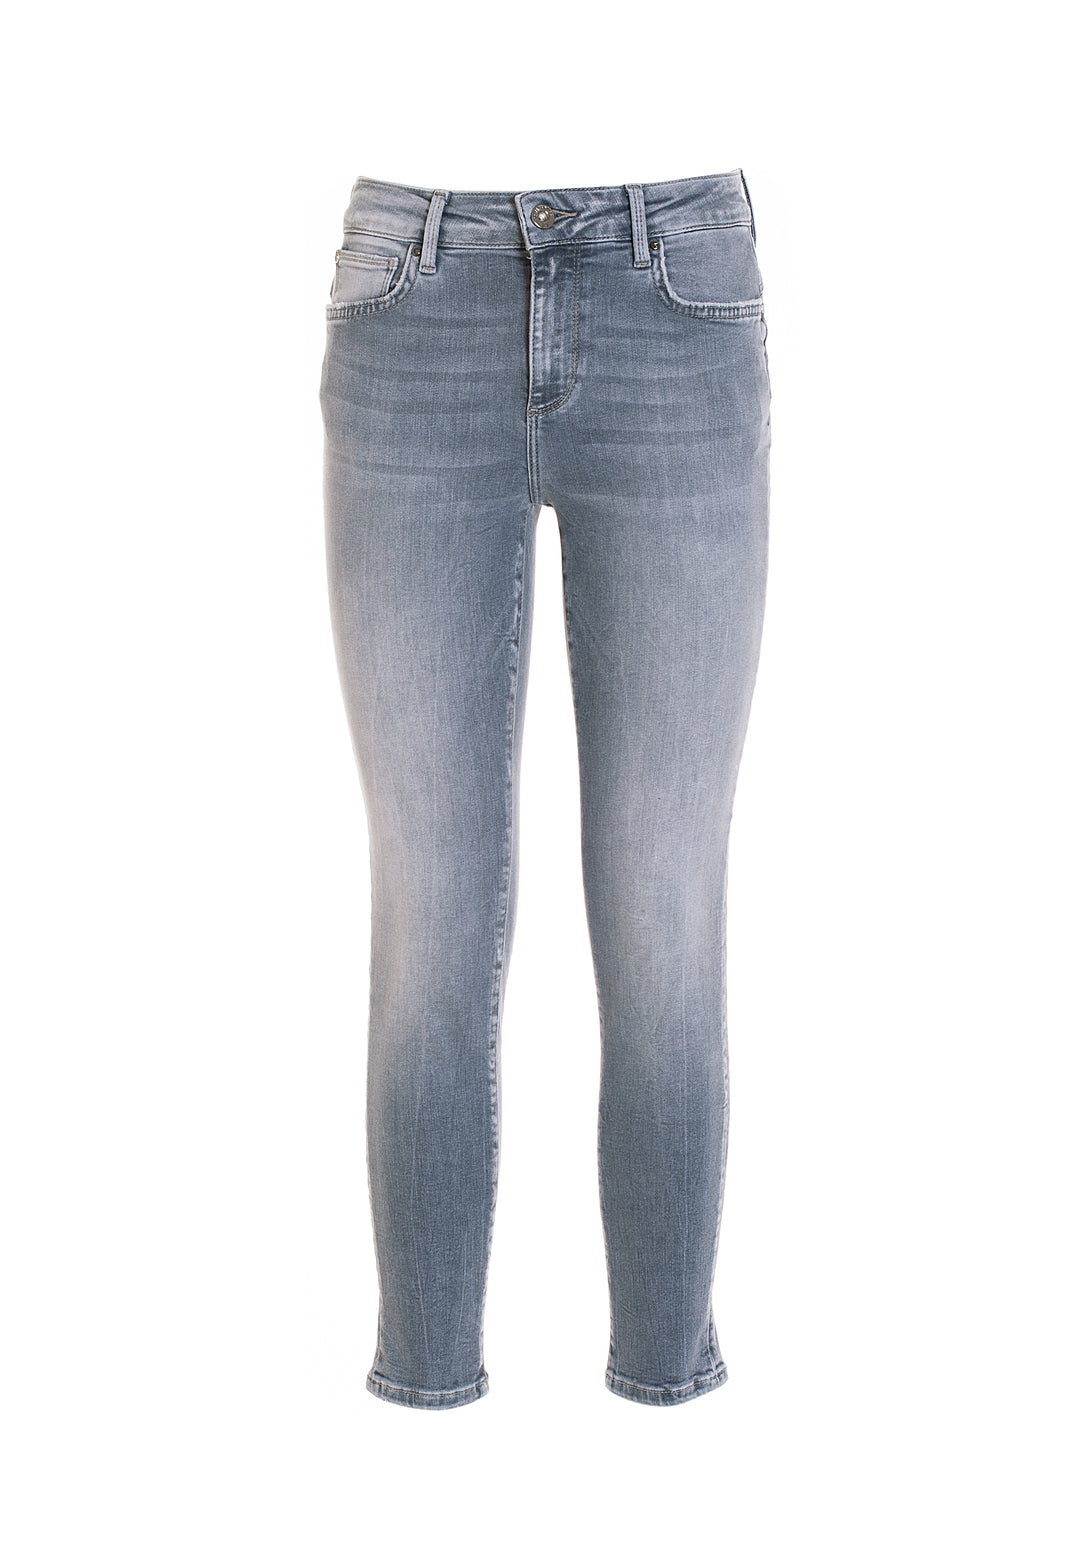 Jeans skinny fit with shape-up effect made in grey denim with middle wash